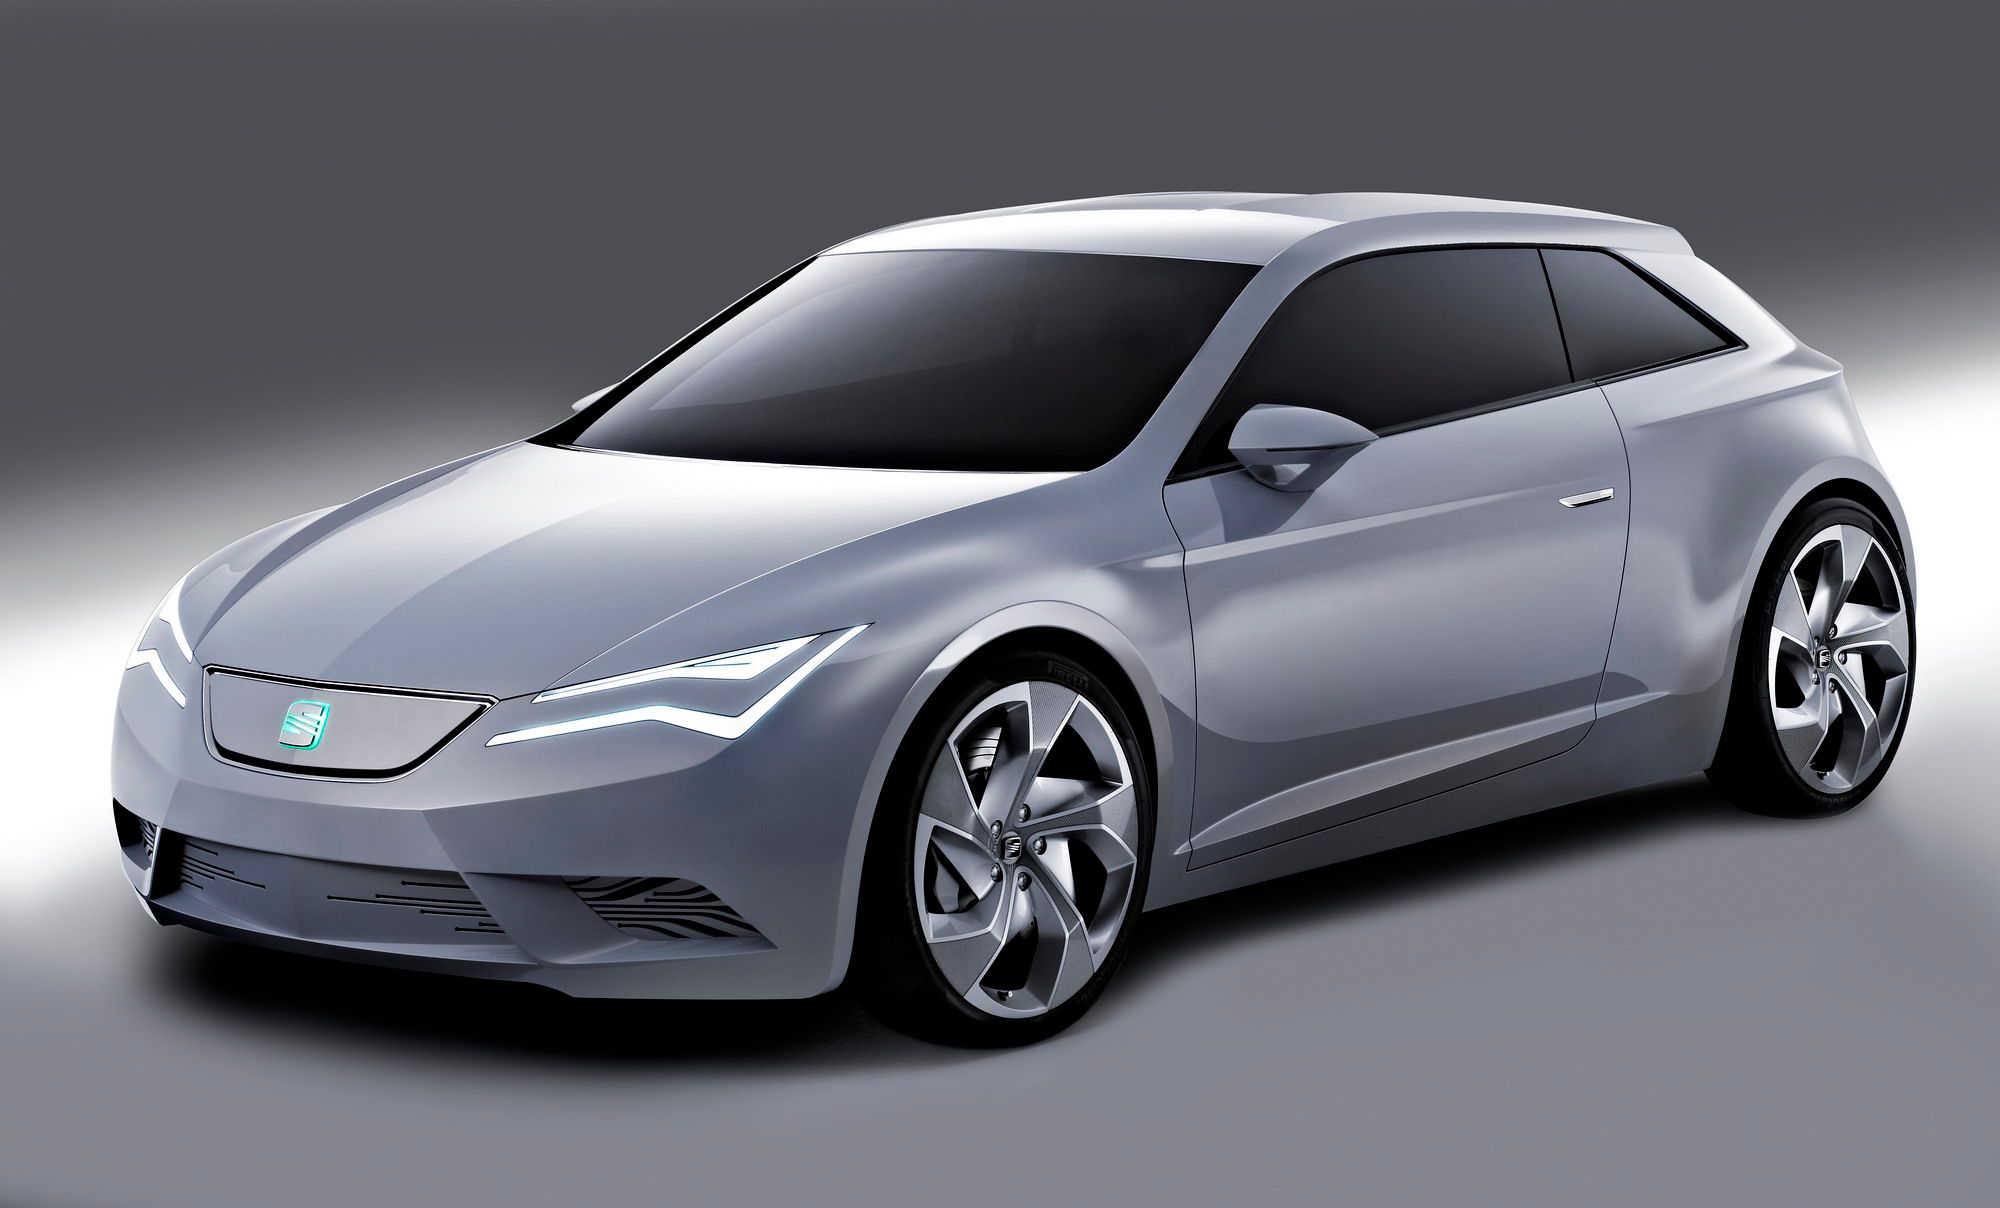 2010 Seat Ibe Concept